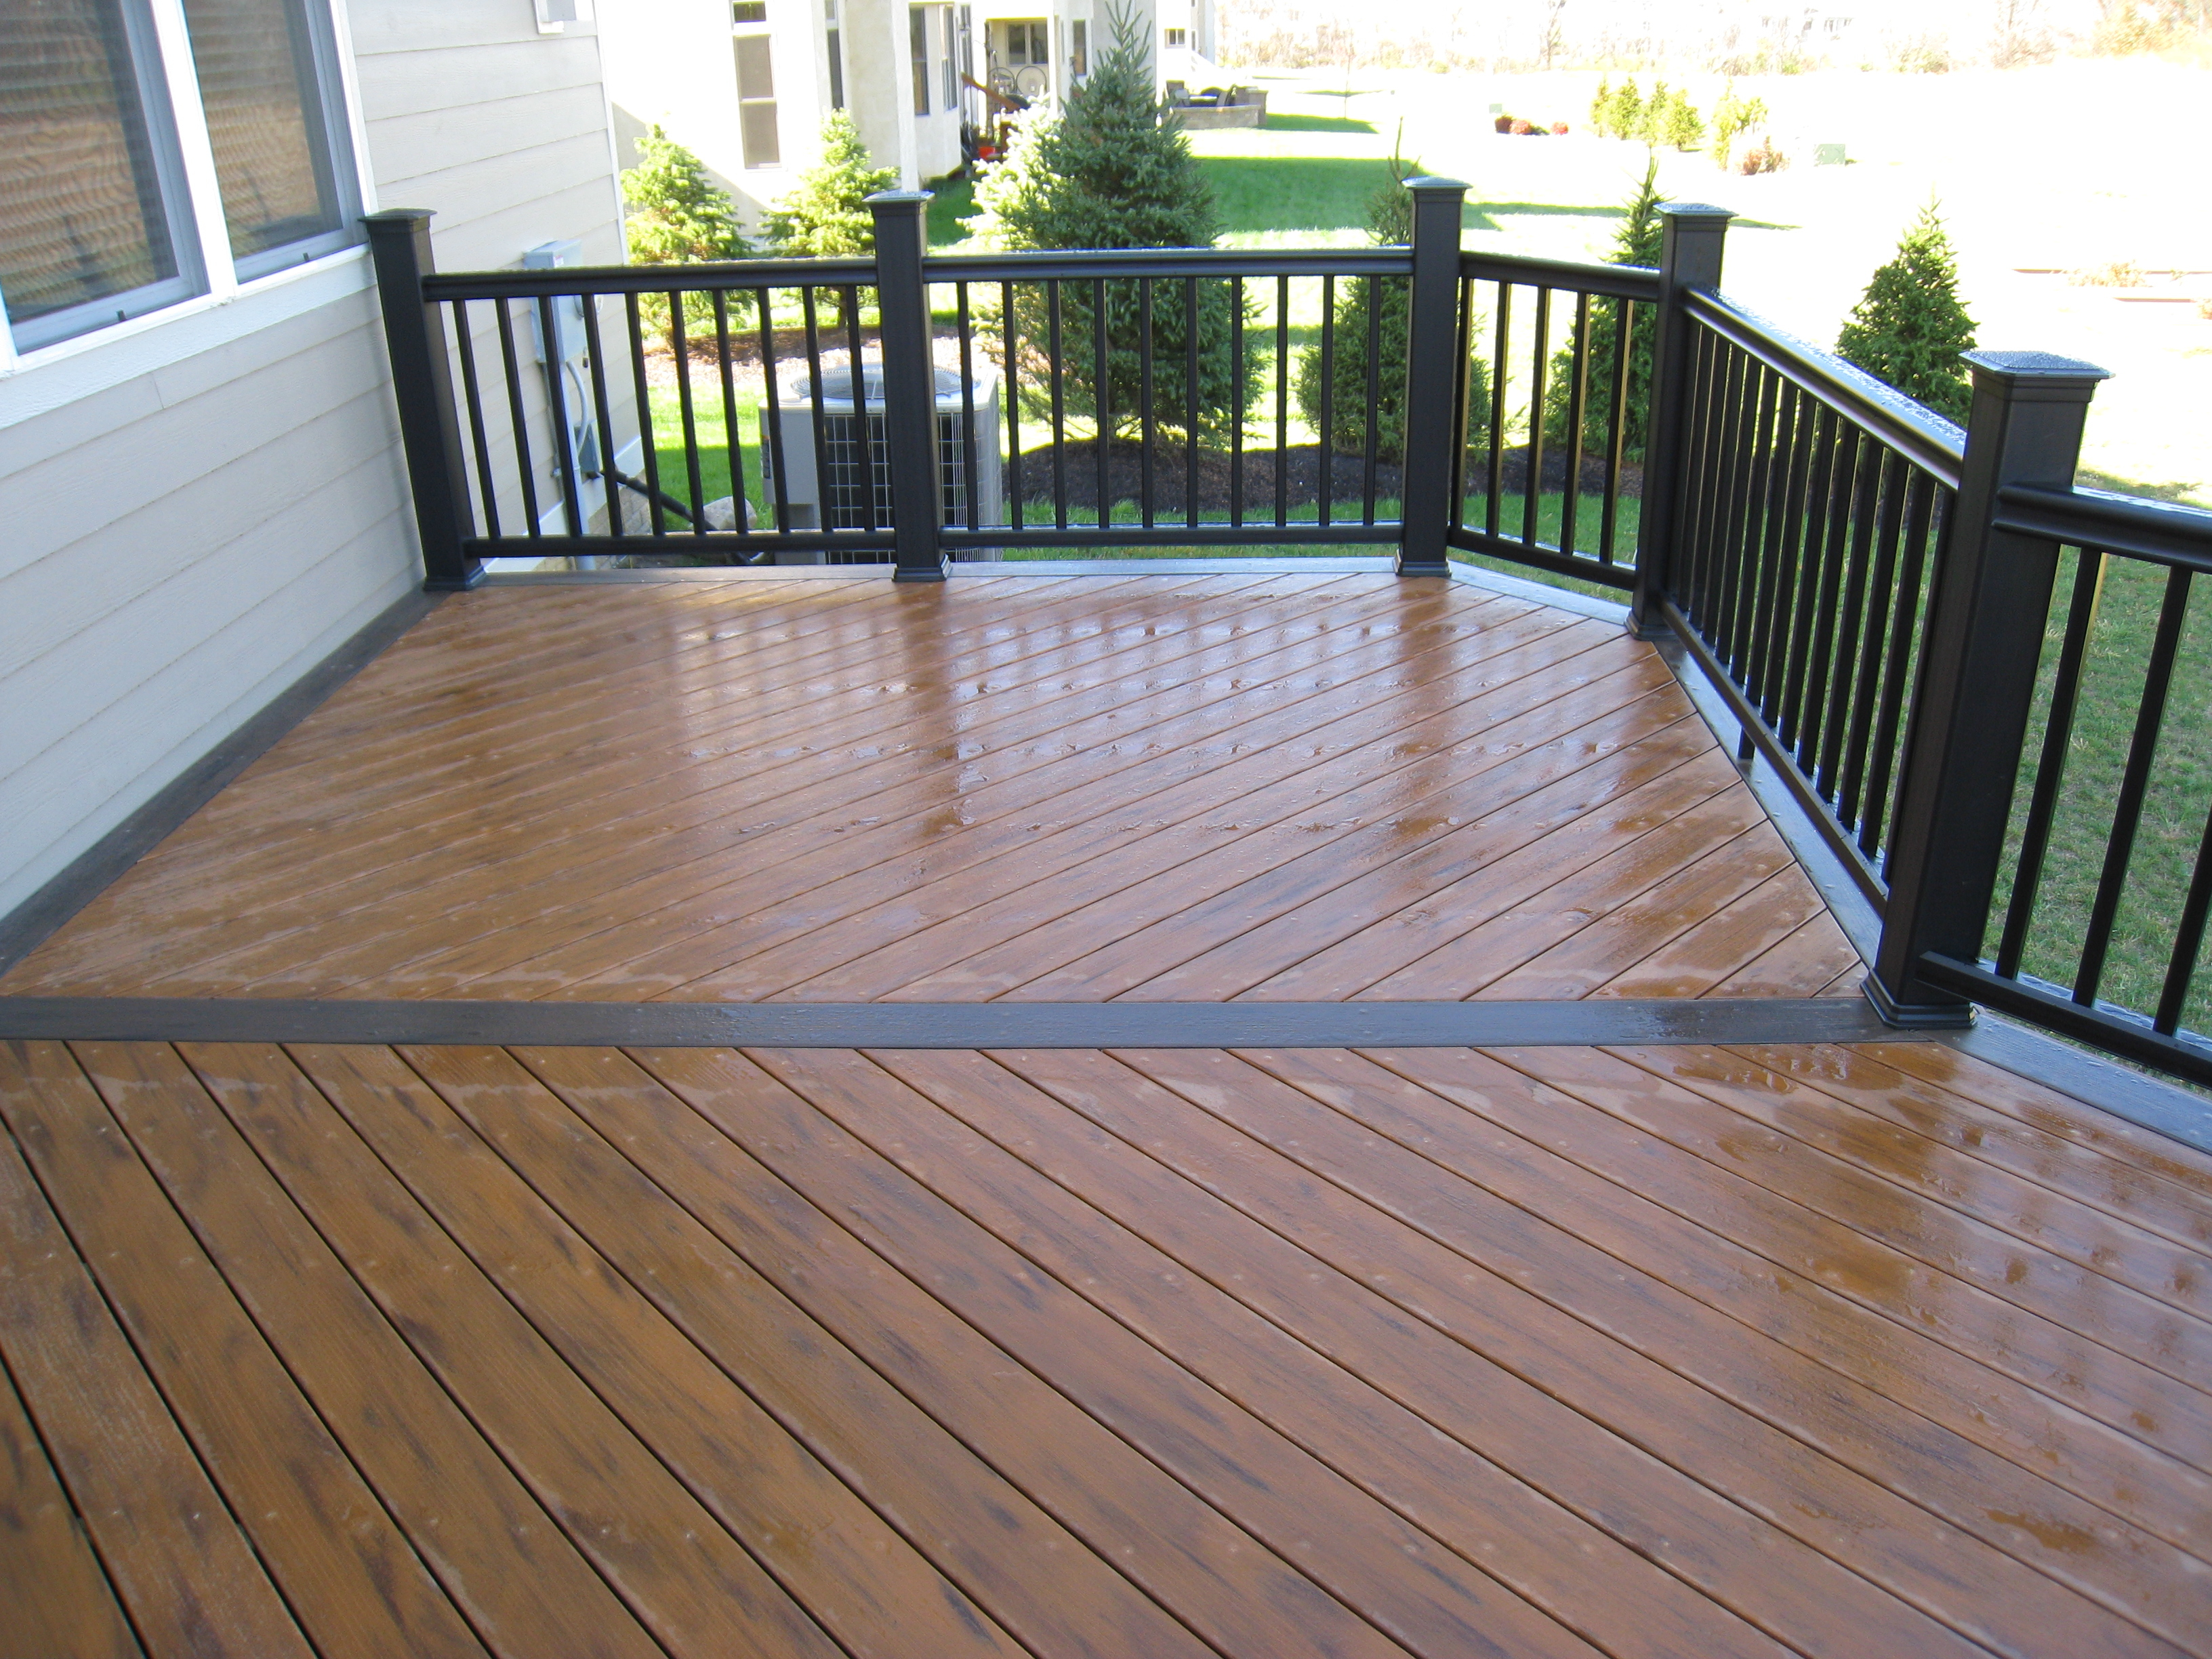 Timbertech Evolutions Decking Columbus Decks Porches And Patios within measurements 3264 X 2448